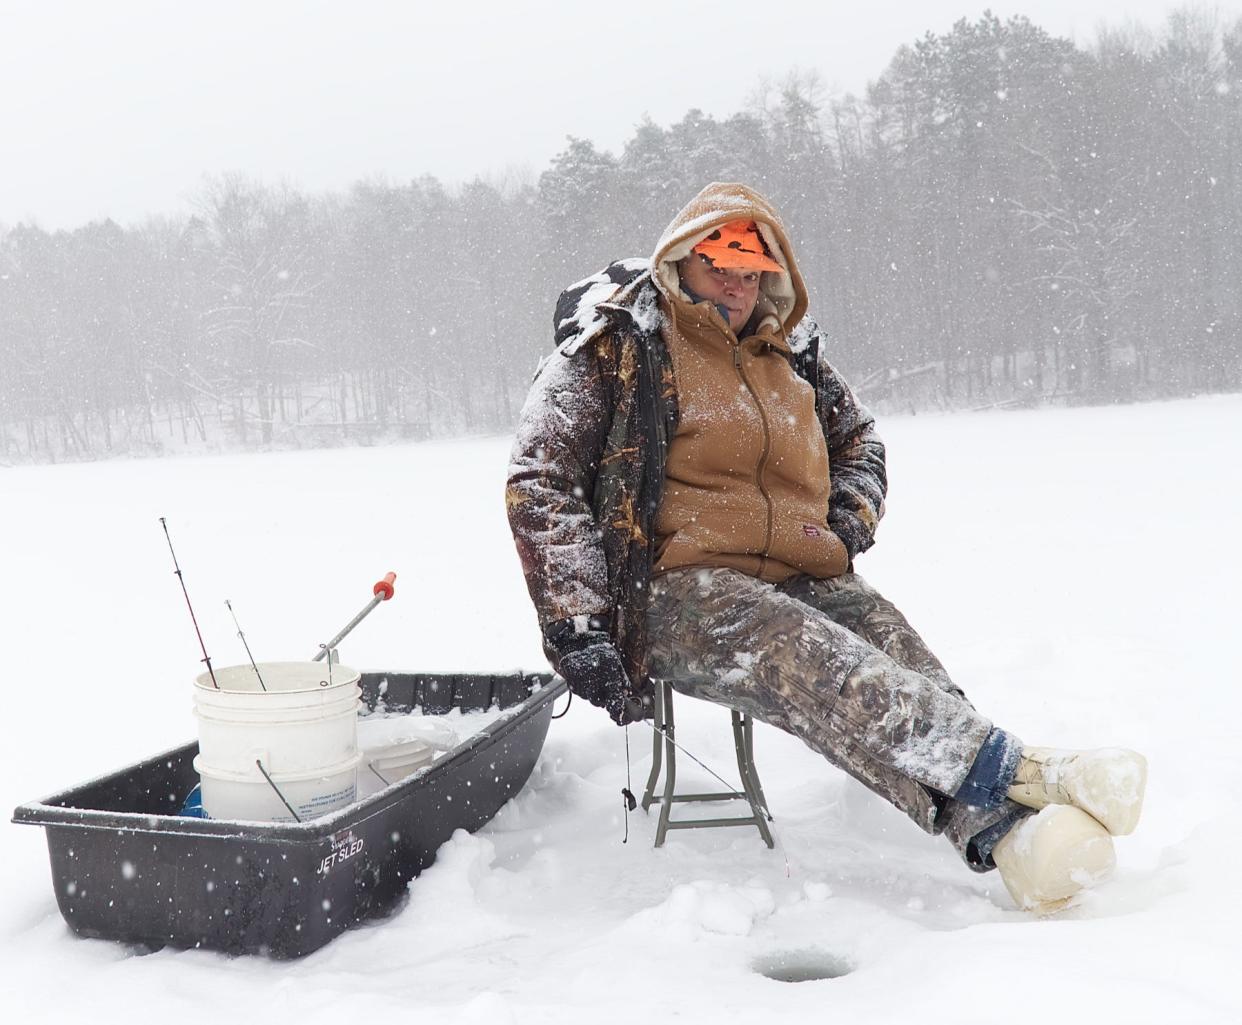 Bill Molesky of Alliance headed out to the Mogadore Reservoir off Route 43 in Suffield Monday. He said he caught mostly perch between about 10 a.m. and 1:30 p.m.